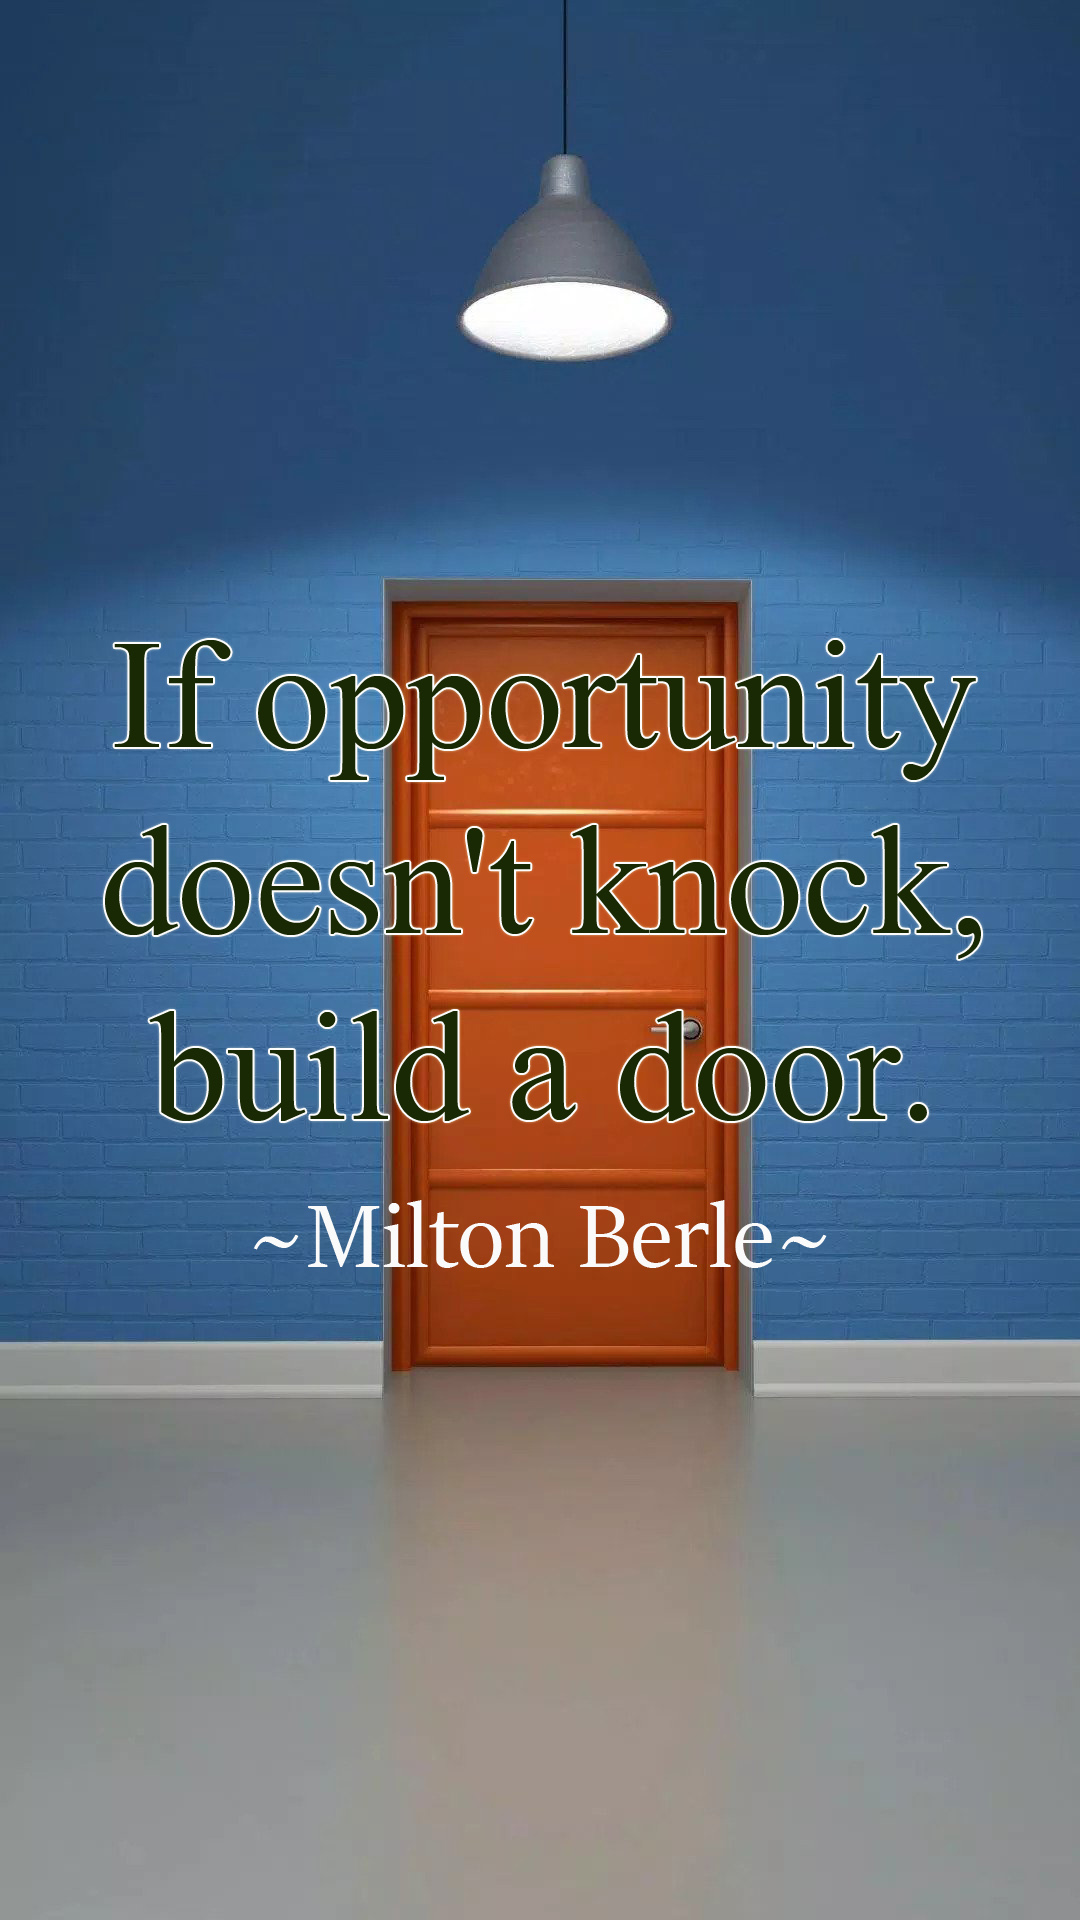 Inspiring Picture with Inspirational Quote by Milton Berle - HD ...